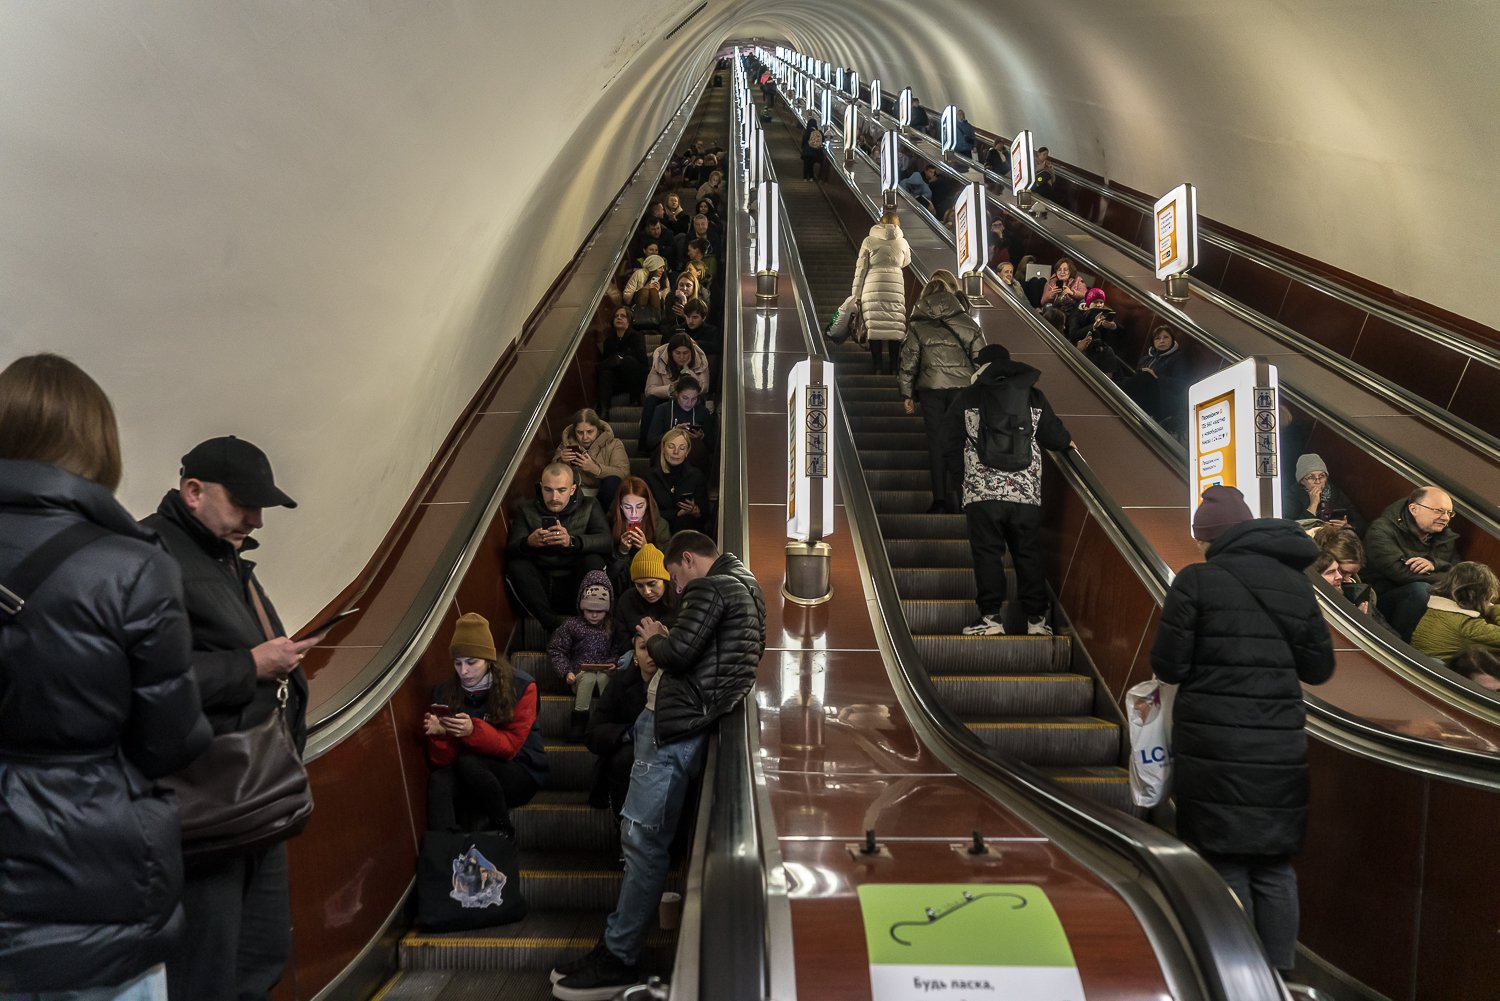  People gather on escalators in an underground metro station after air raid sirens sounded in Kyiv and there were reports of explosions, either from Russian missiles or from Ukraine's air defense system taking them down, on Tuesday, November 15, 2022